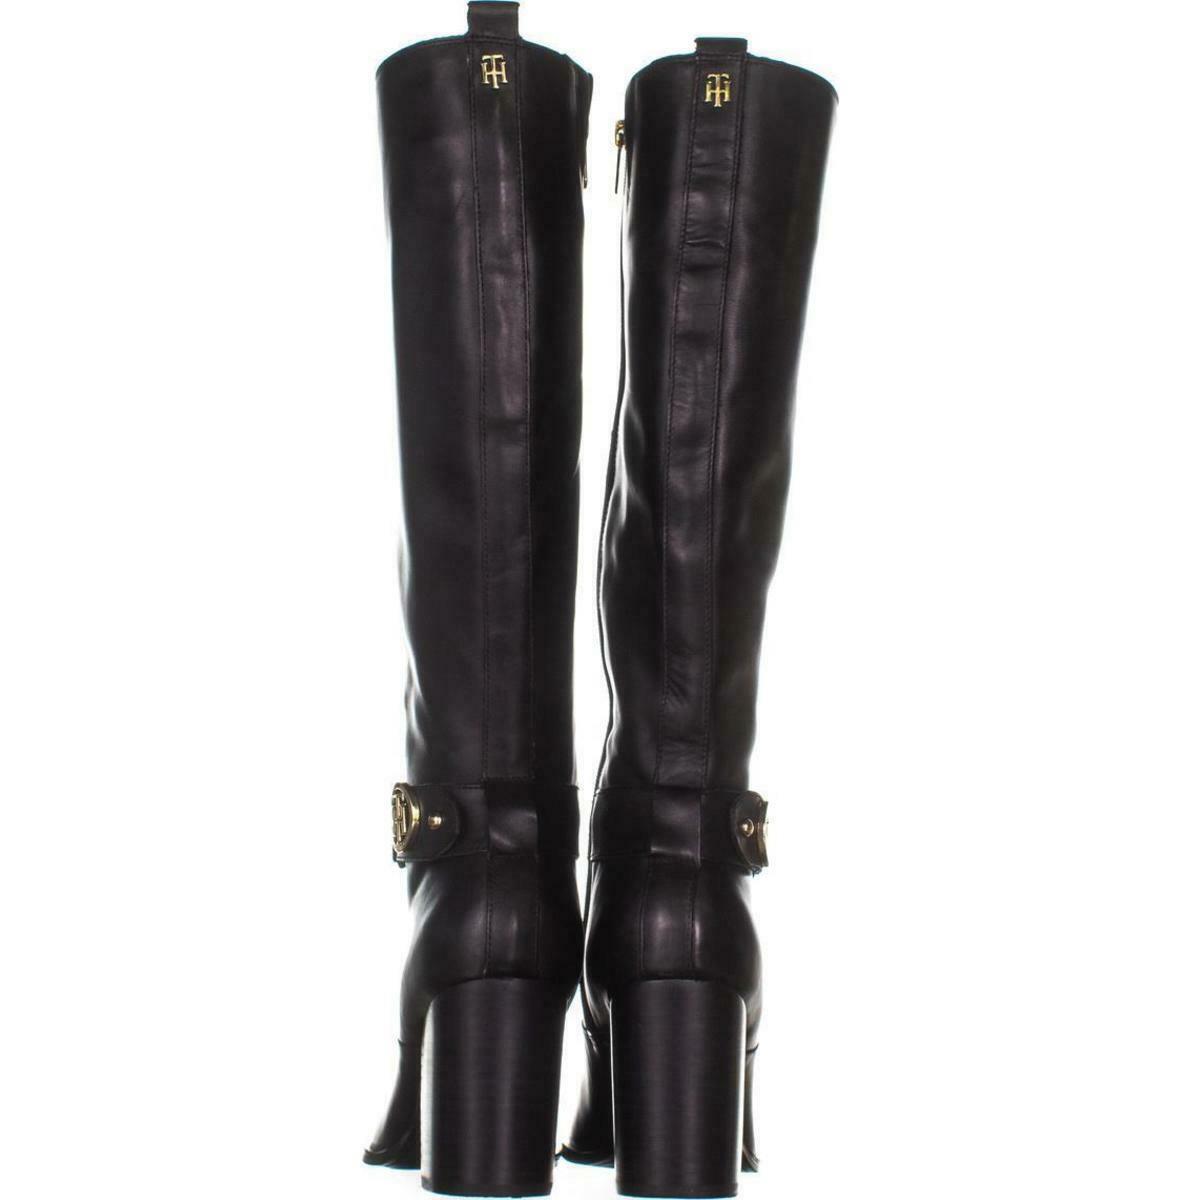 Tommy Hilfiger Deeanne Knee high Boots 089, Black Leather, 8.5 US - Boots